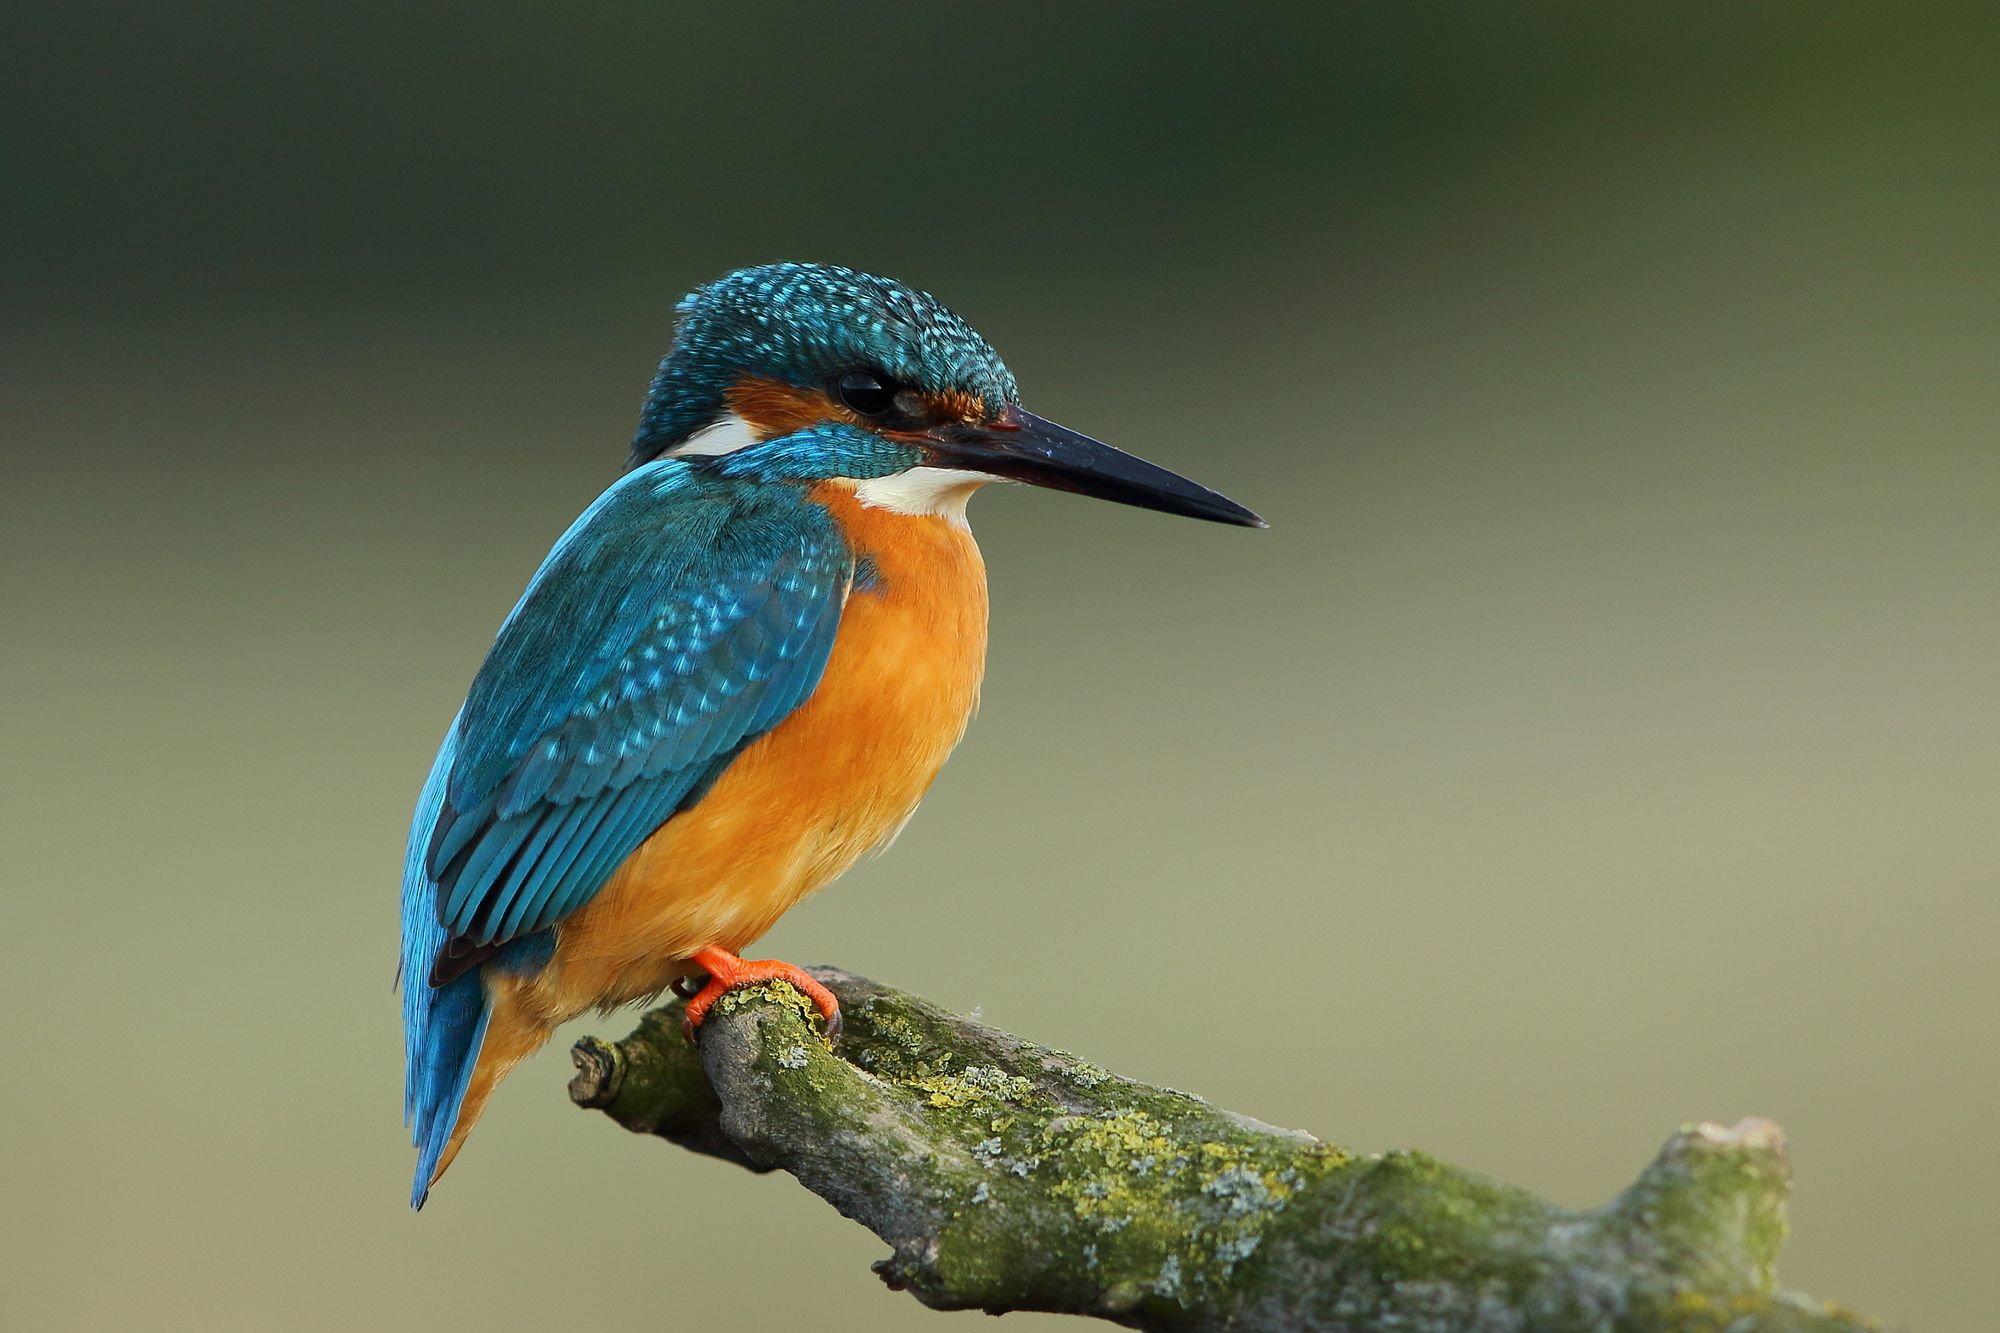 Close up of a Kingfisher sitting on a tree branch